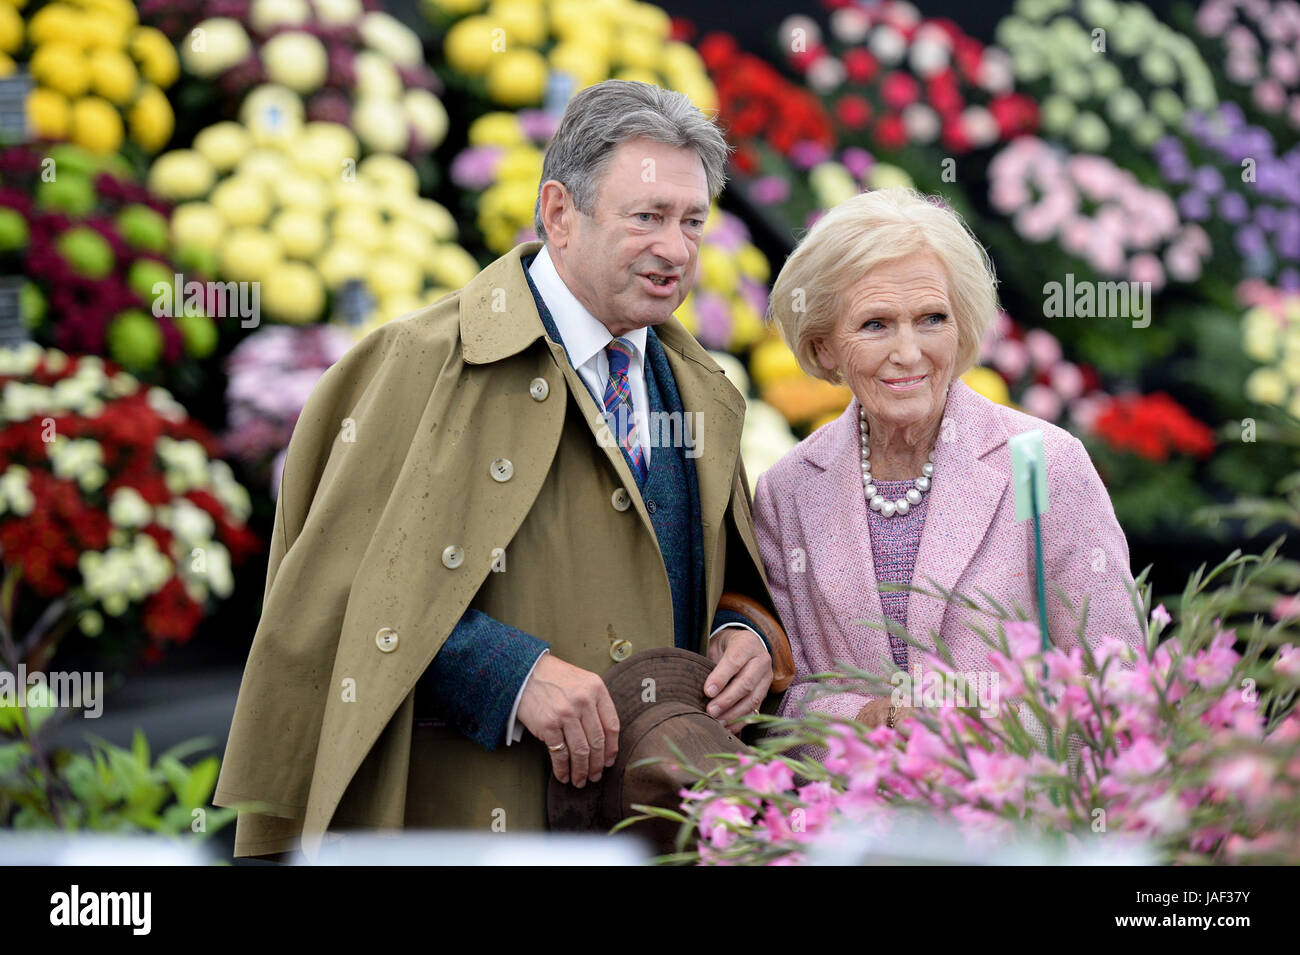 Chatsworth, Derbyshire, UK. 6th June, 2017. 6th June 2017. Chatsworth Royal Horticultural Society Flower Show. Picture shows TV presenters Alan Titchmarsh and Mary Berry opening the Royal Horticultural Flower Show at Chatsworth House in Derbyshire. Credit: Howard Walker/Alamy Live News Stock Photo